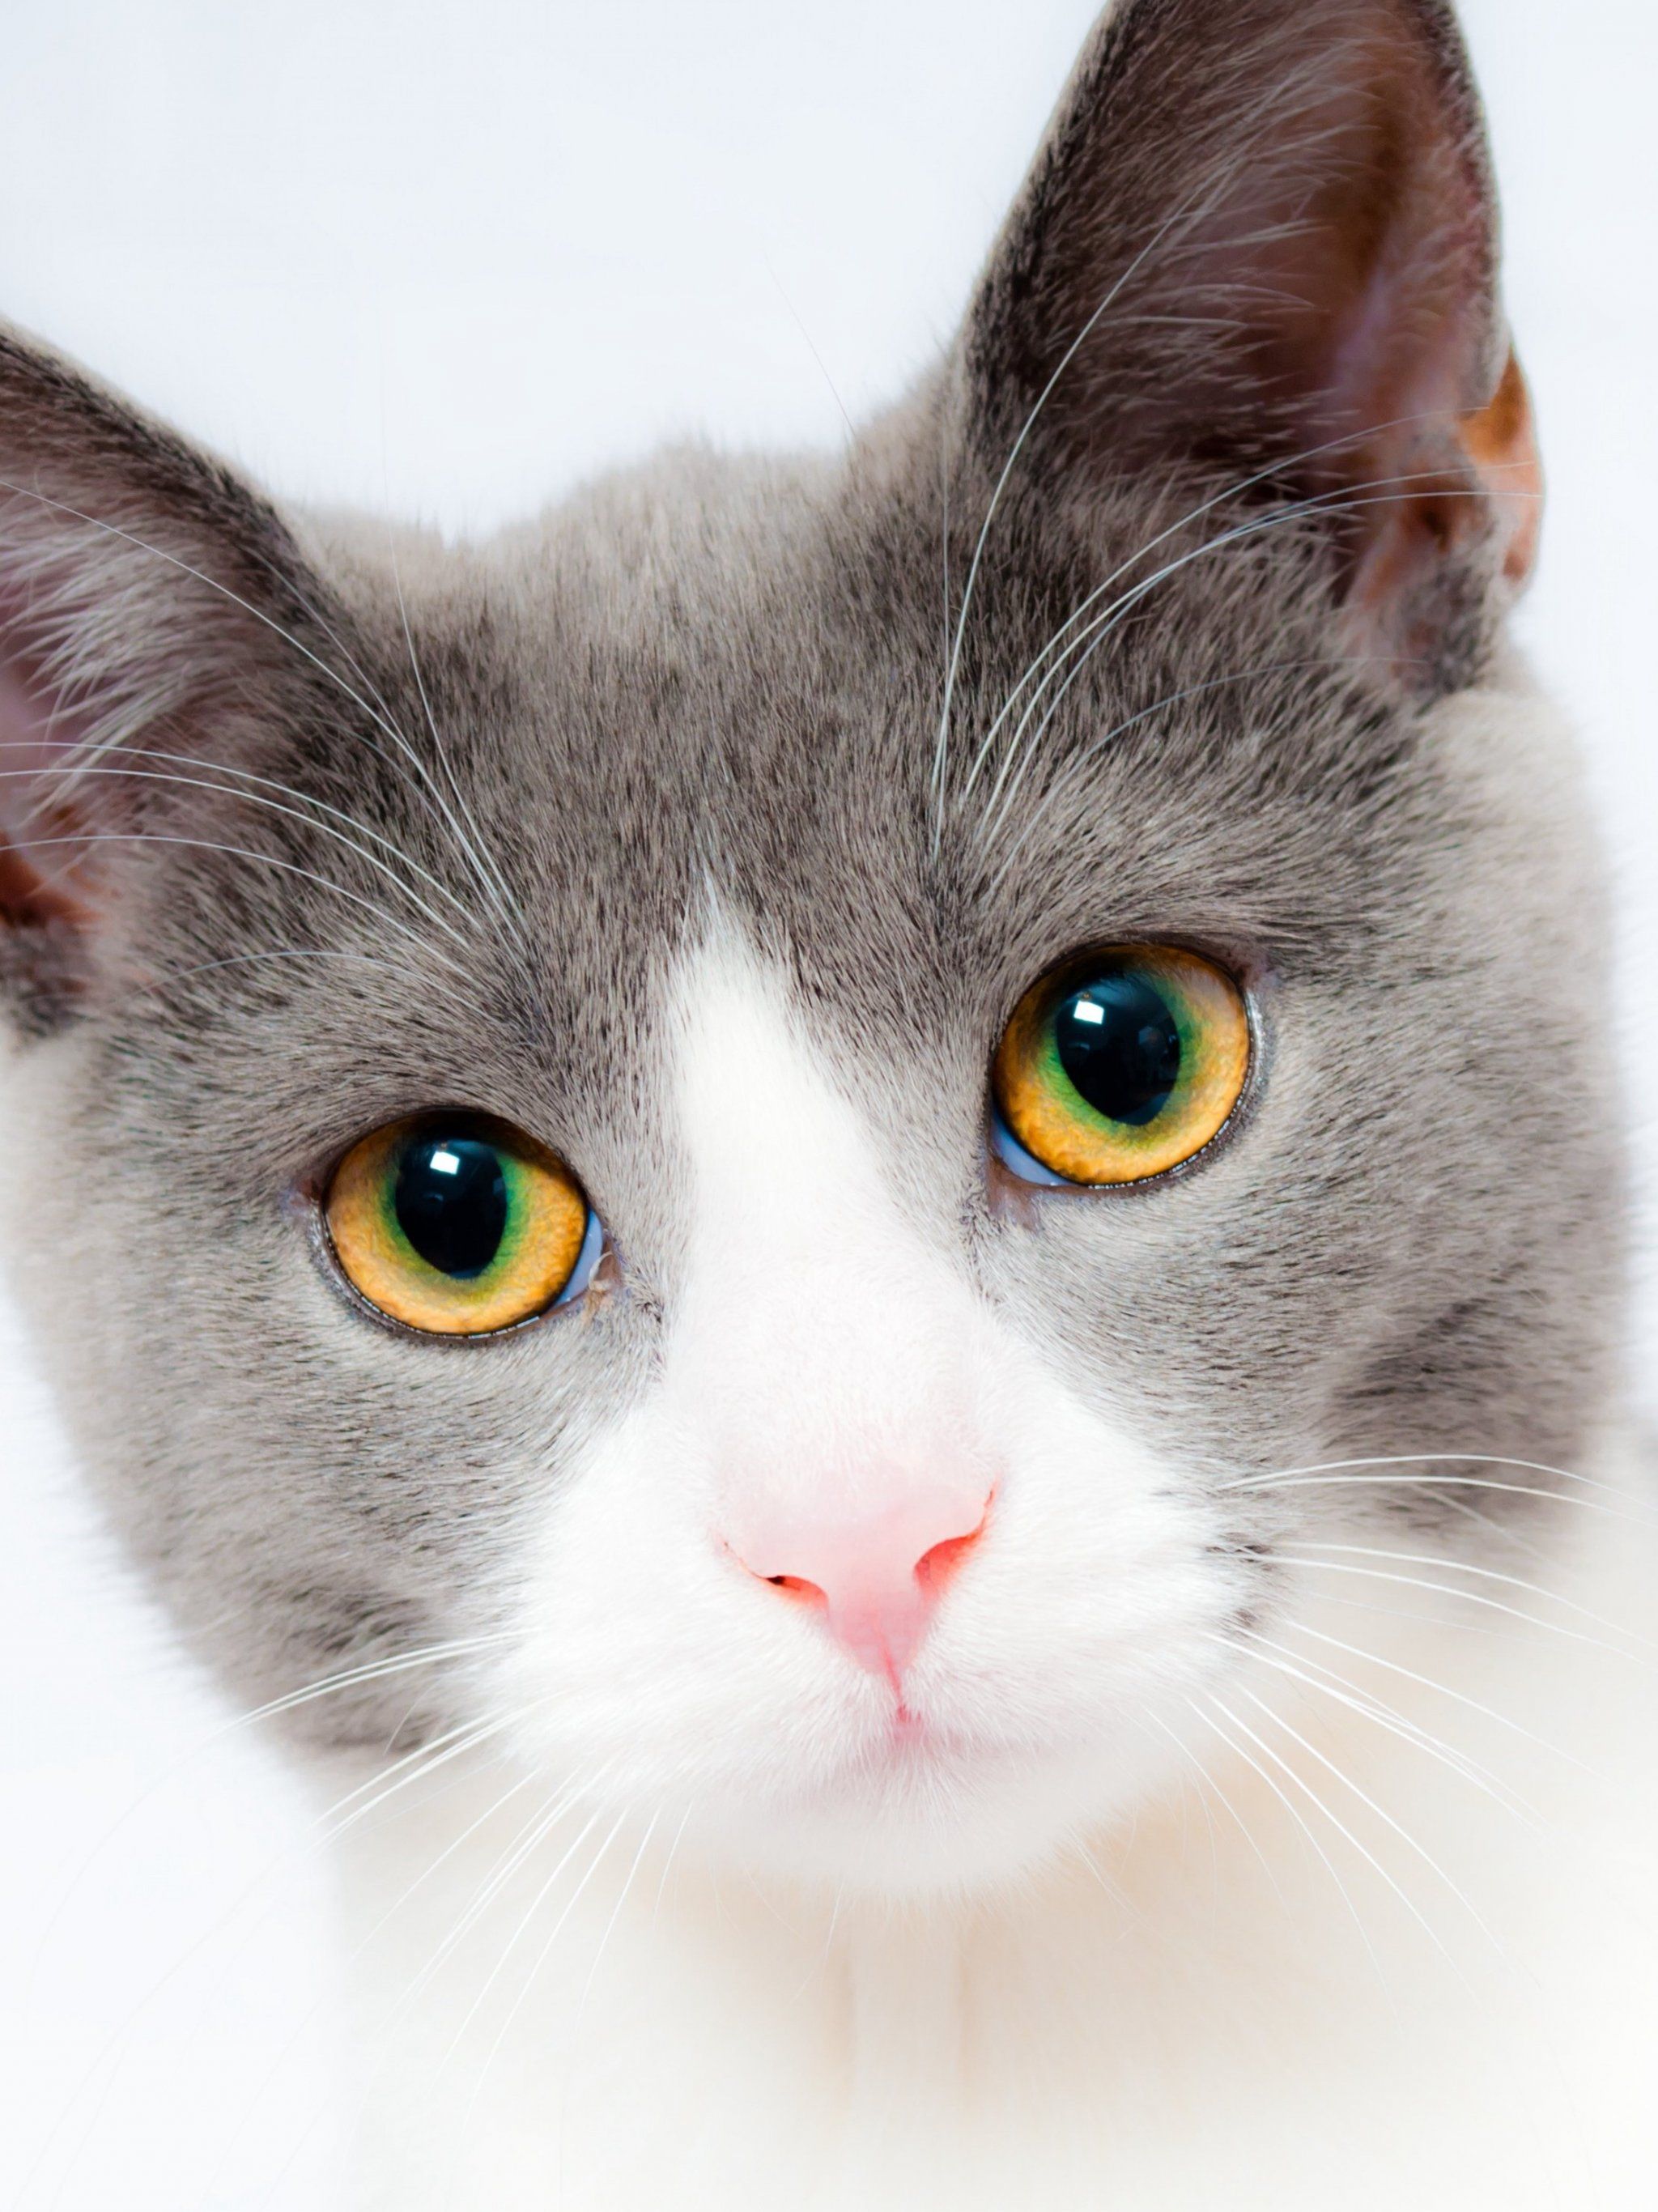 Grey and White Cat Wallpaper, Android & Desktop Background